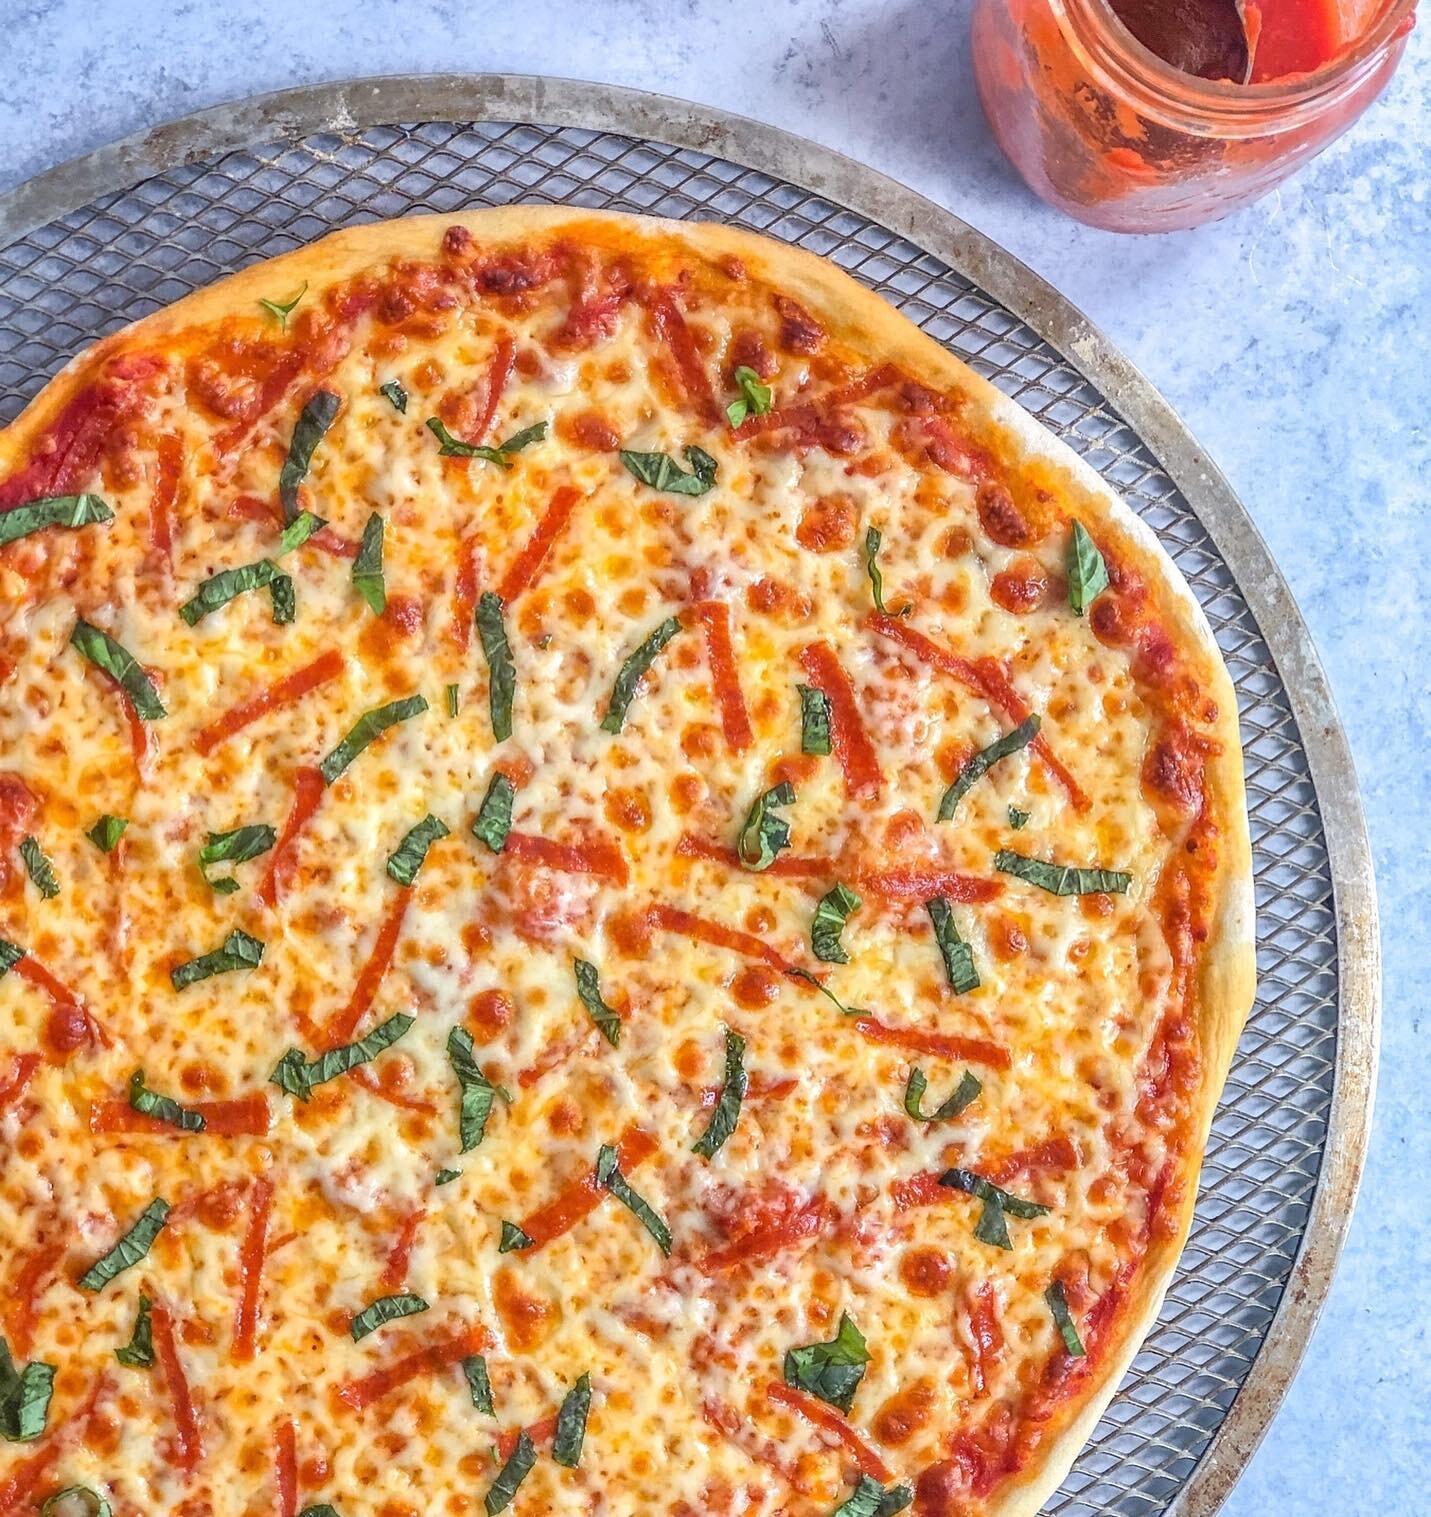 Pizza for Papa!🍕That's what he asked for, so today we get to watch Italy ⚽ together and eat pizza, win-win!🇮🇹Happy Father's Day to all the strong and hard working dads in world!⁠⁠
⁠⁠
#danimade #recipe #recipedeveloper #foodblogger #easyrecipe #hom